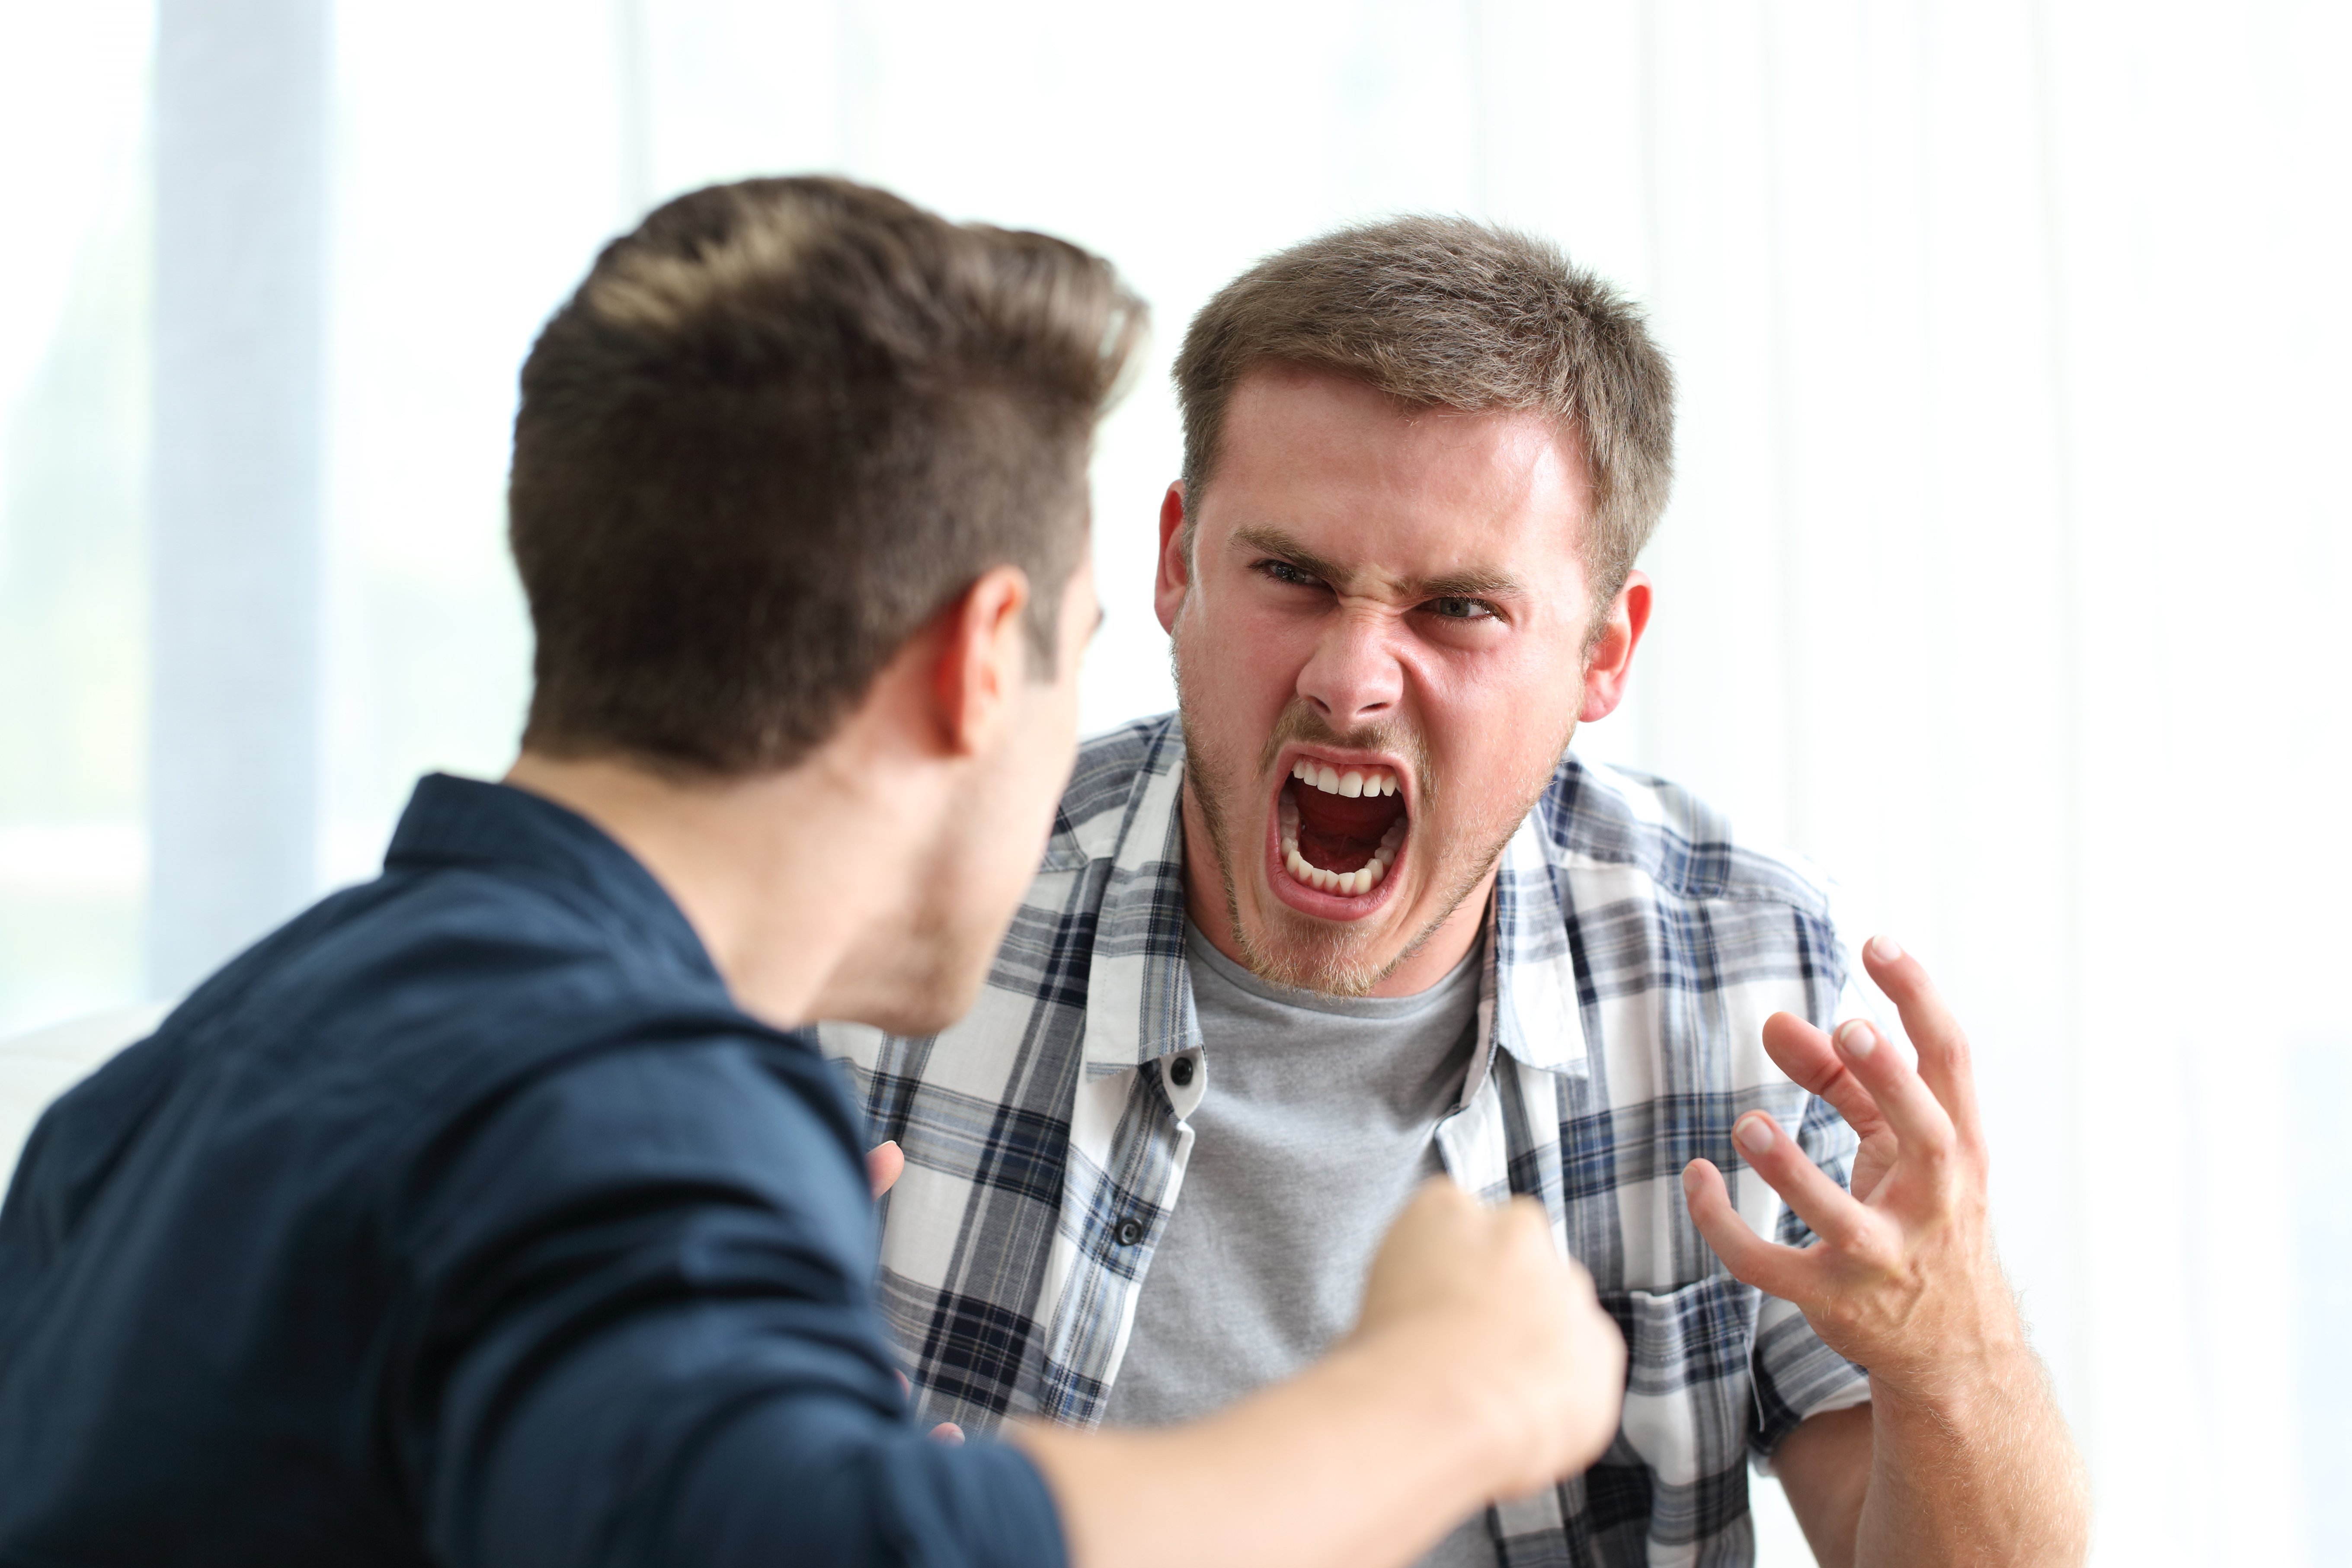 Brothers arguing with each other | Source: Shutterstock 